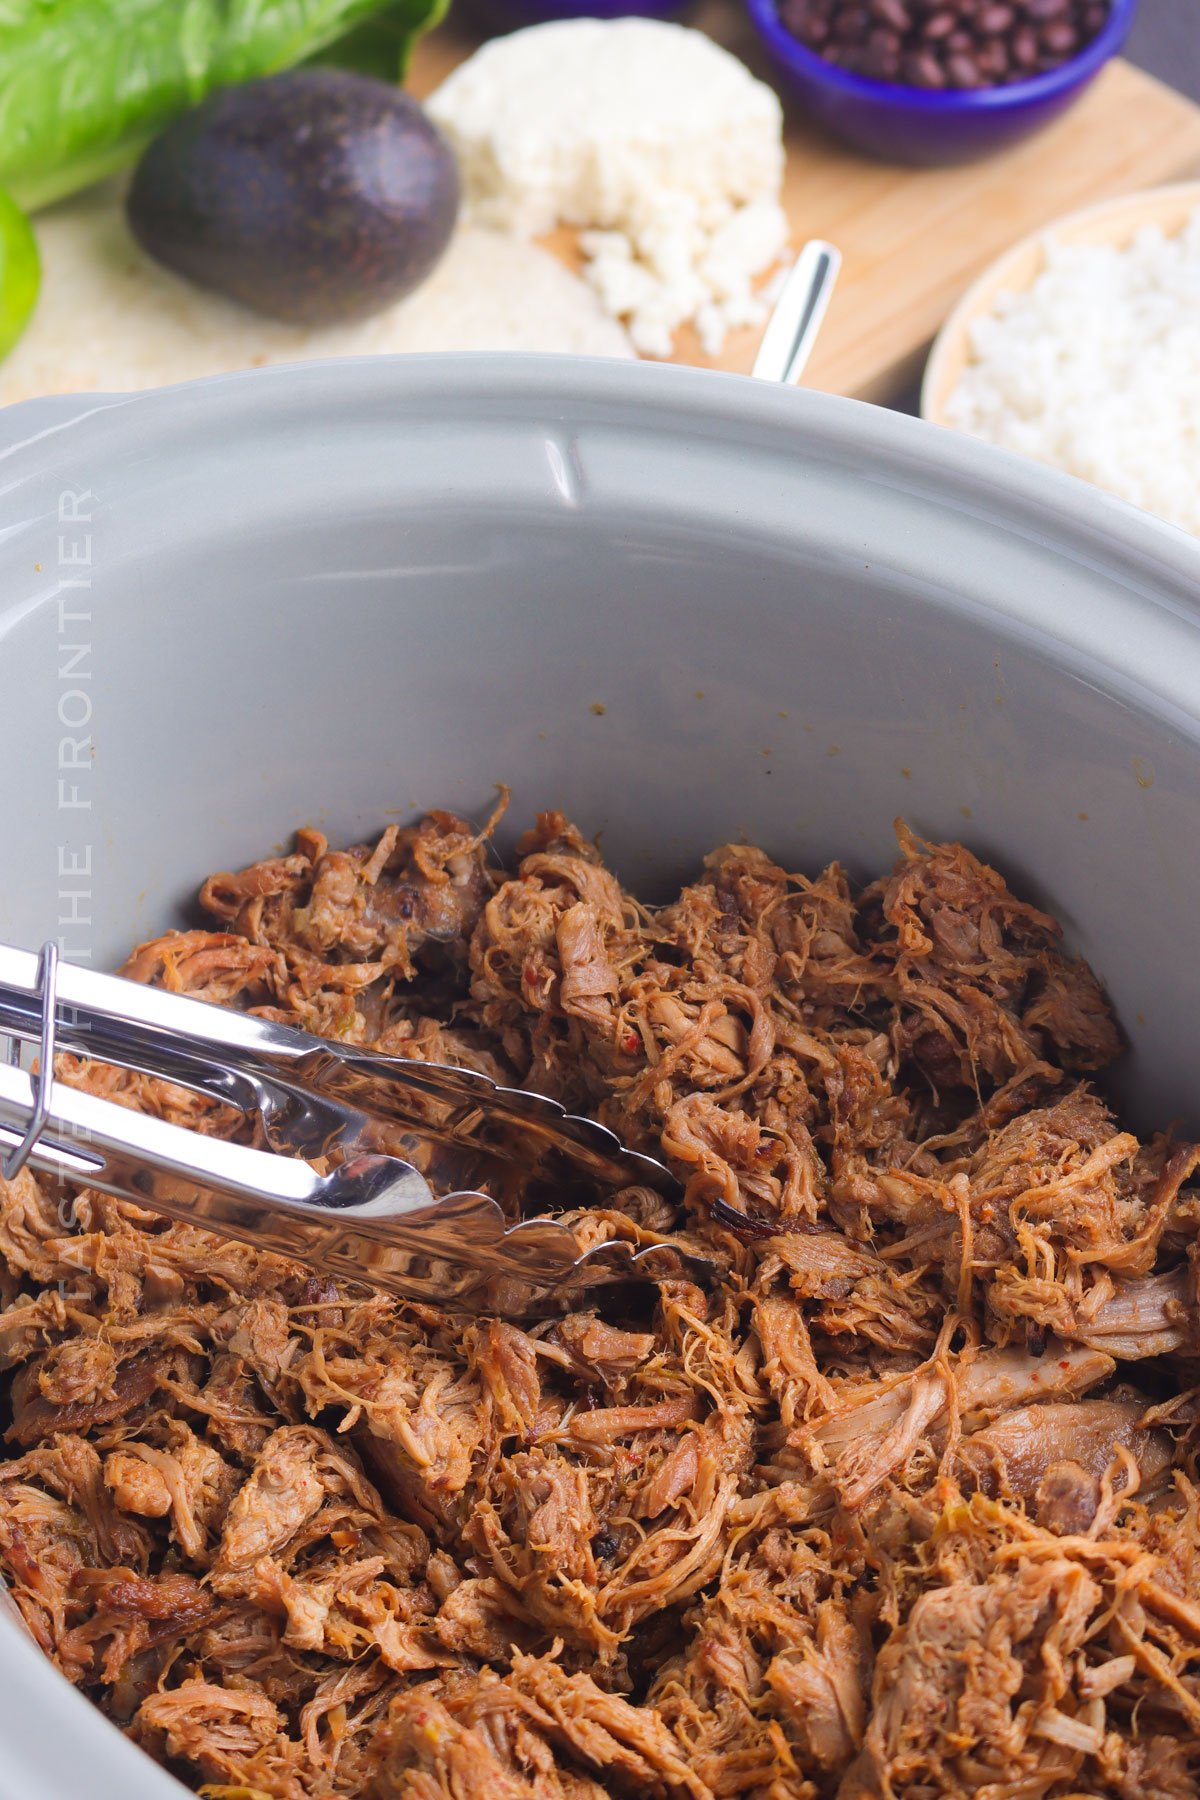 ready to serve - pulled pork